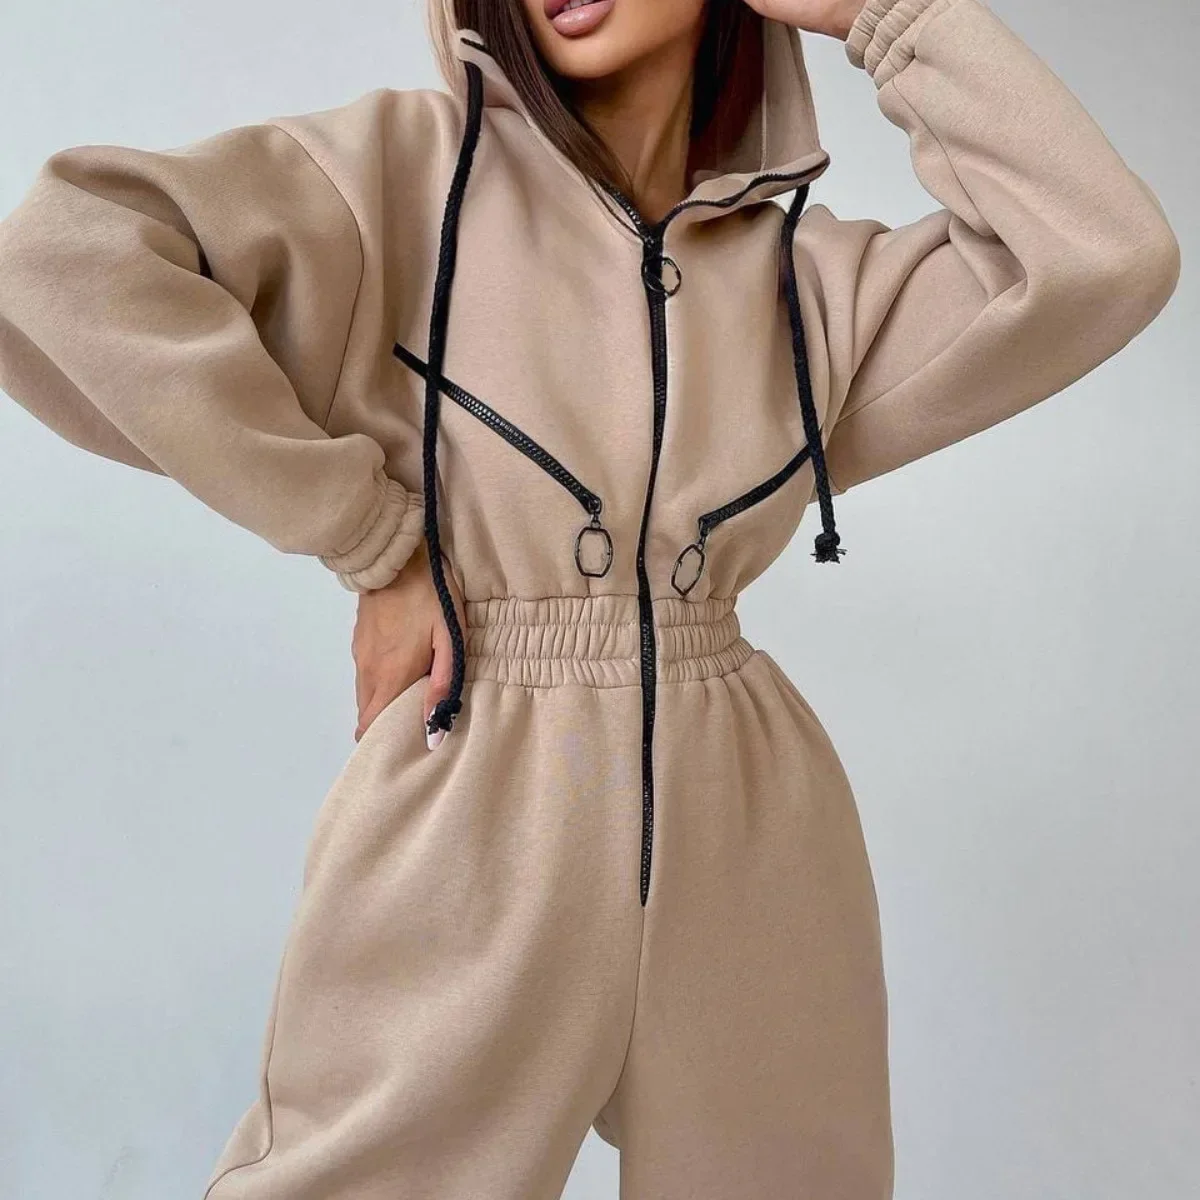 

Elegant Hoodies Jumpsuit Korea Fashion Women Long Sleeve One Piece Outfit Warm Overalls Winter Sportwear Rompers Tracksuits New